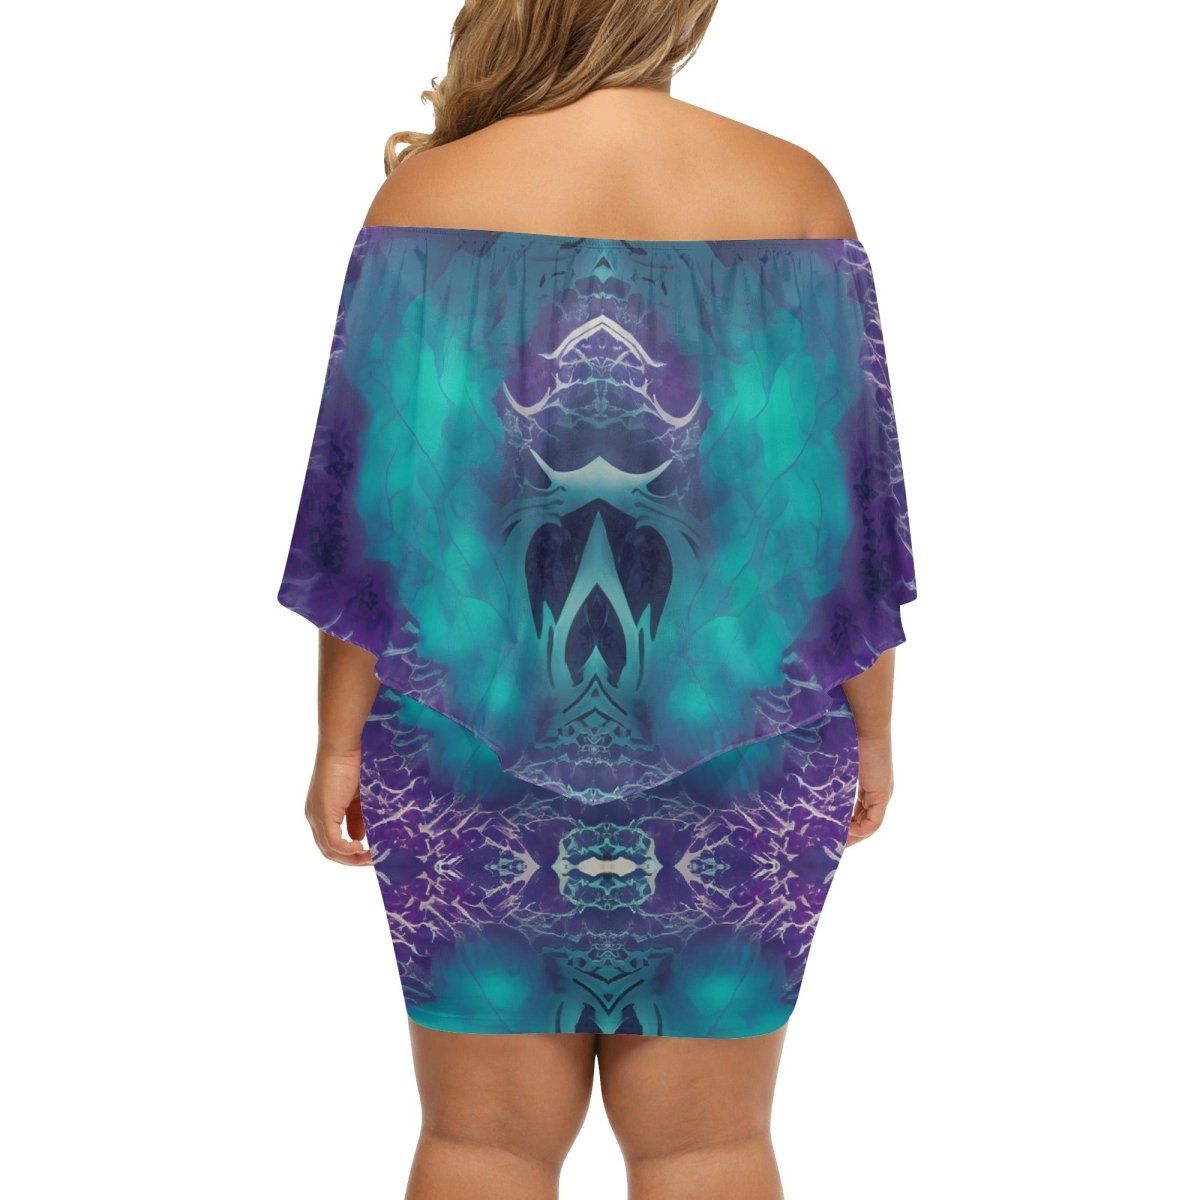 Teal and Purple Off The Shoulder Wrap Dress - Iron Phoenix GHG